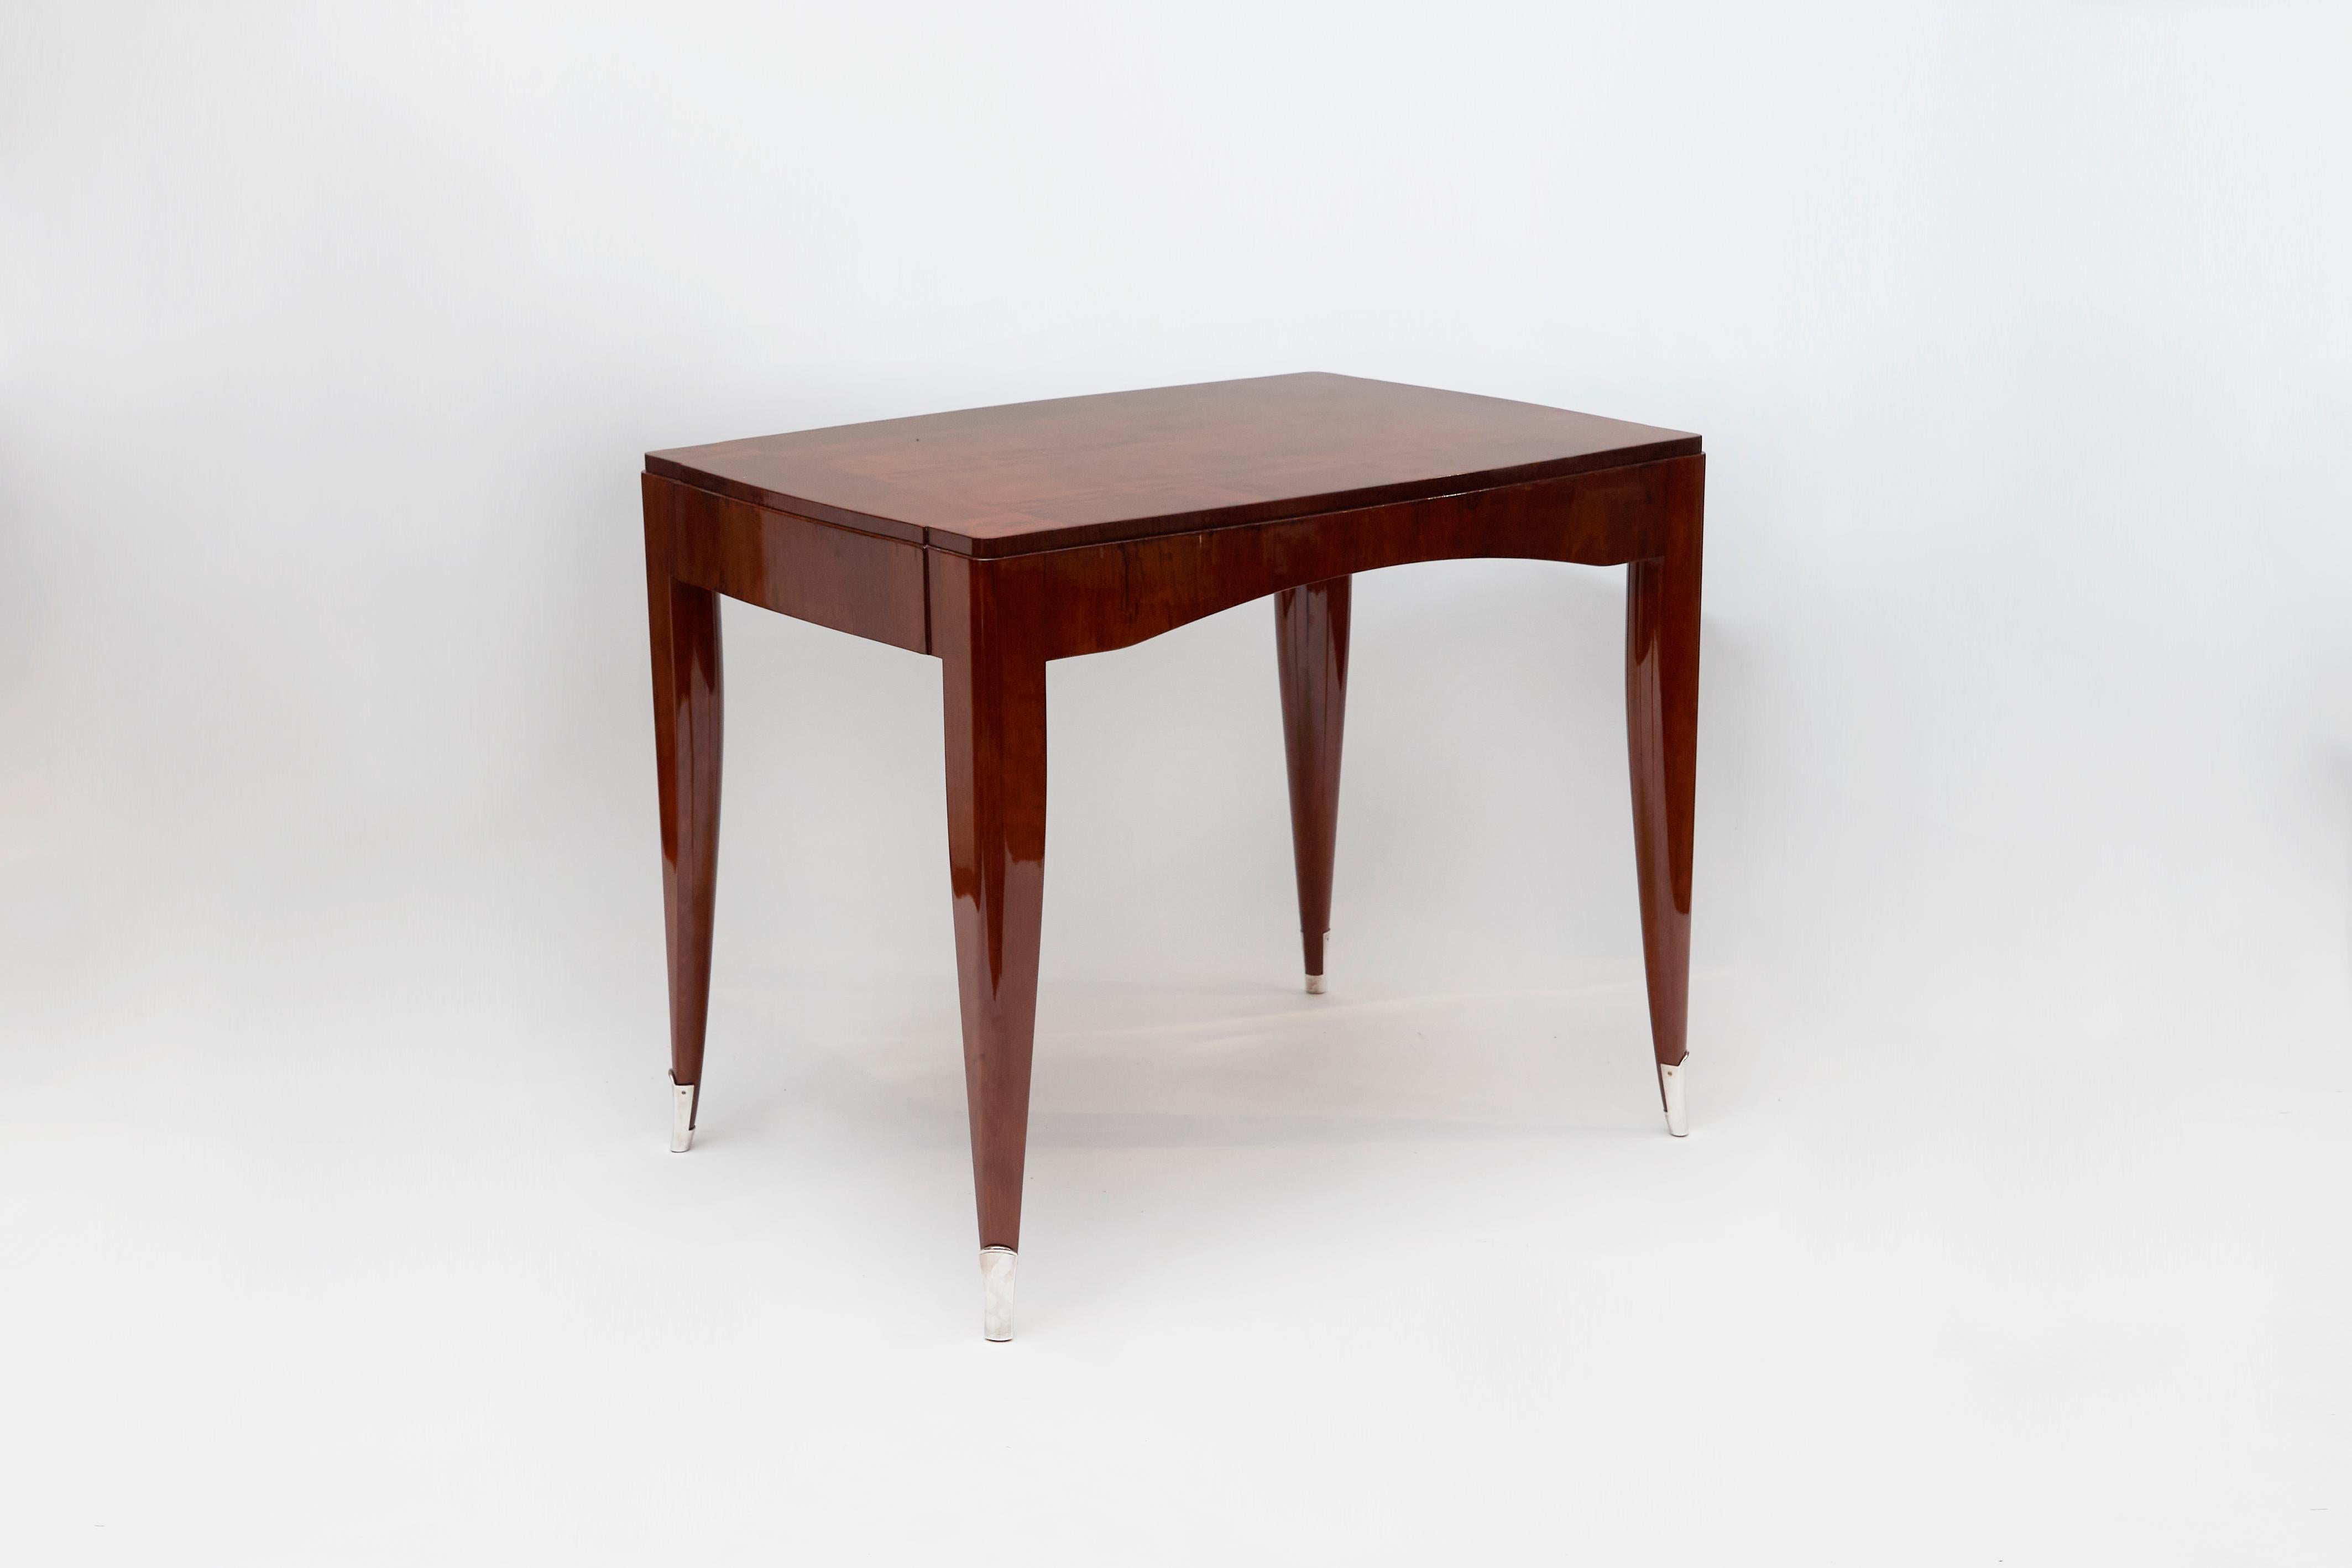 This rare writing table in polished mahogany and silvered bronze is marked by E´mile-Jacques Ruhlmann's signature aesthetic motifs, manifest in its set of flared and tapered legs, and juxtaposition of supple, living curves with others so subtle as